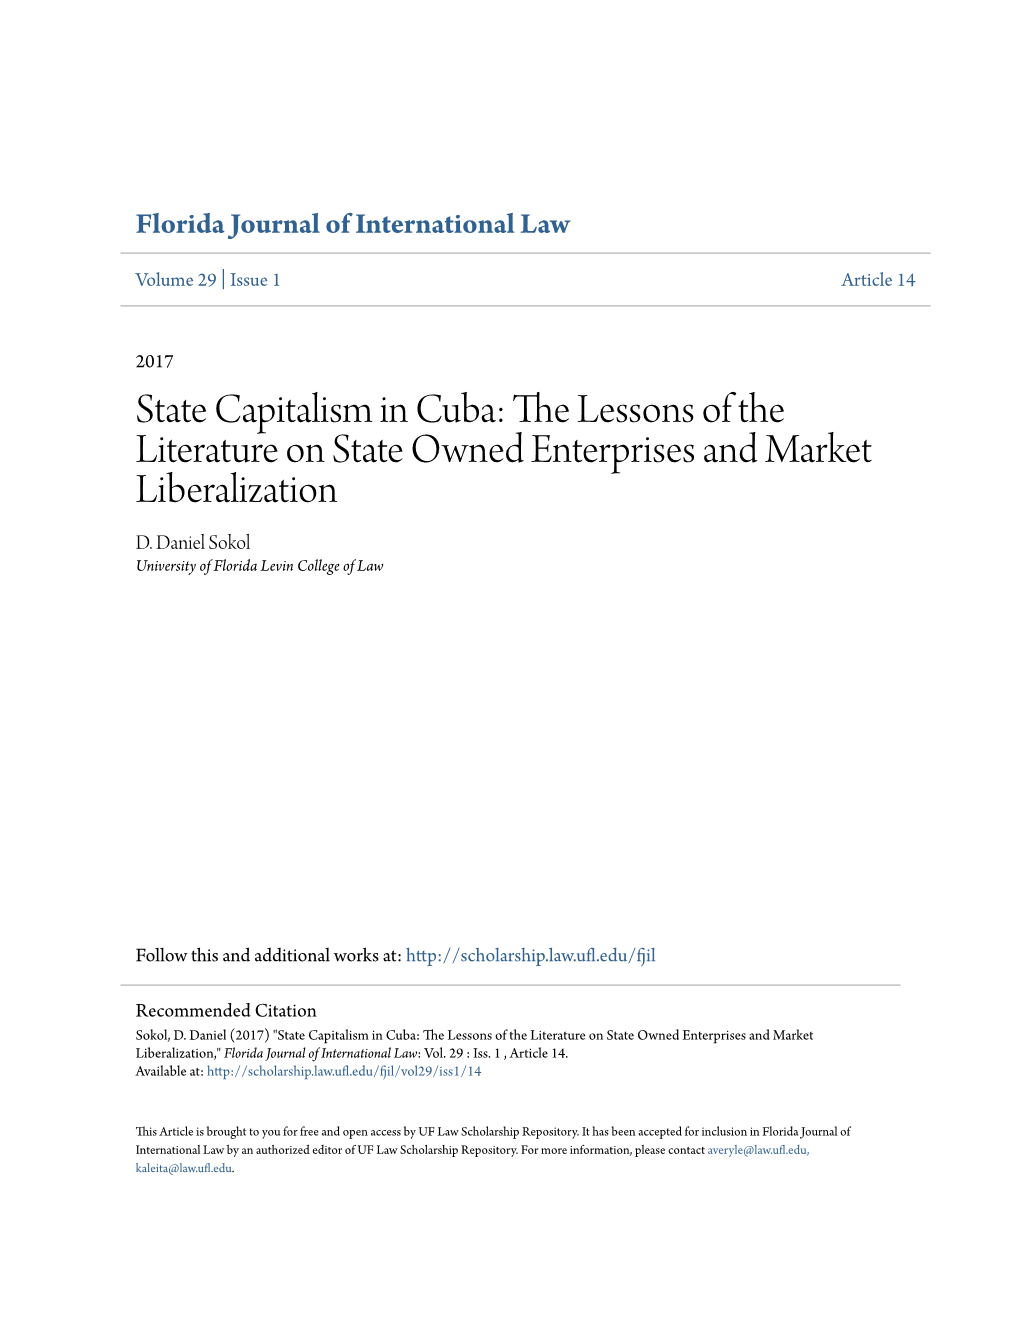 State Capitalism in Cuba: the Lessons of the Literature on State Owned Enterprises and Market Liberalization D